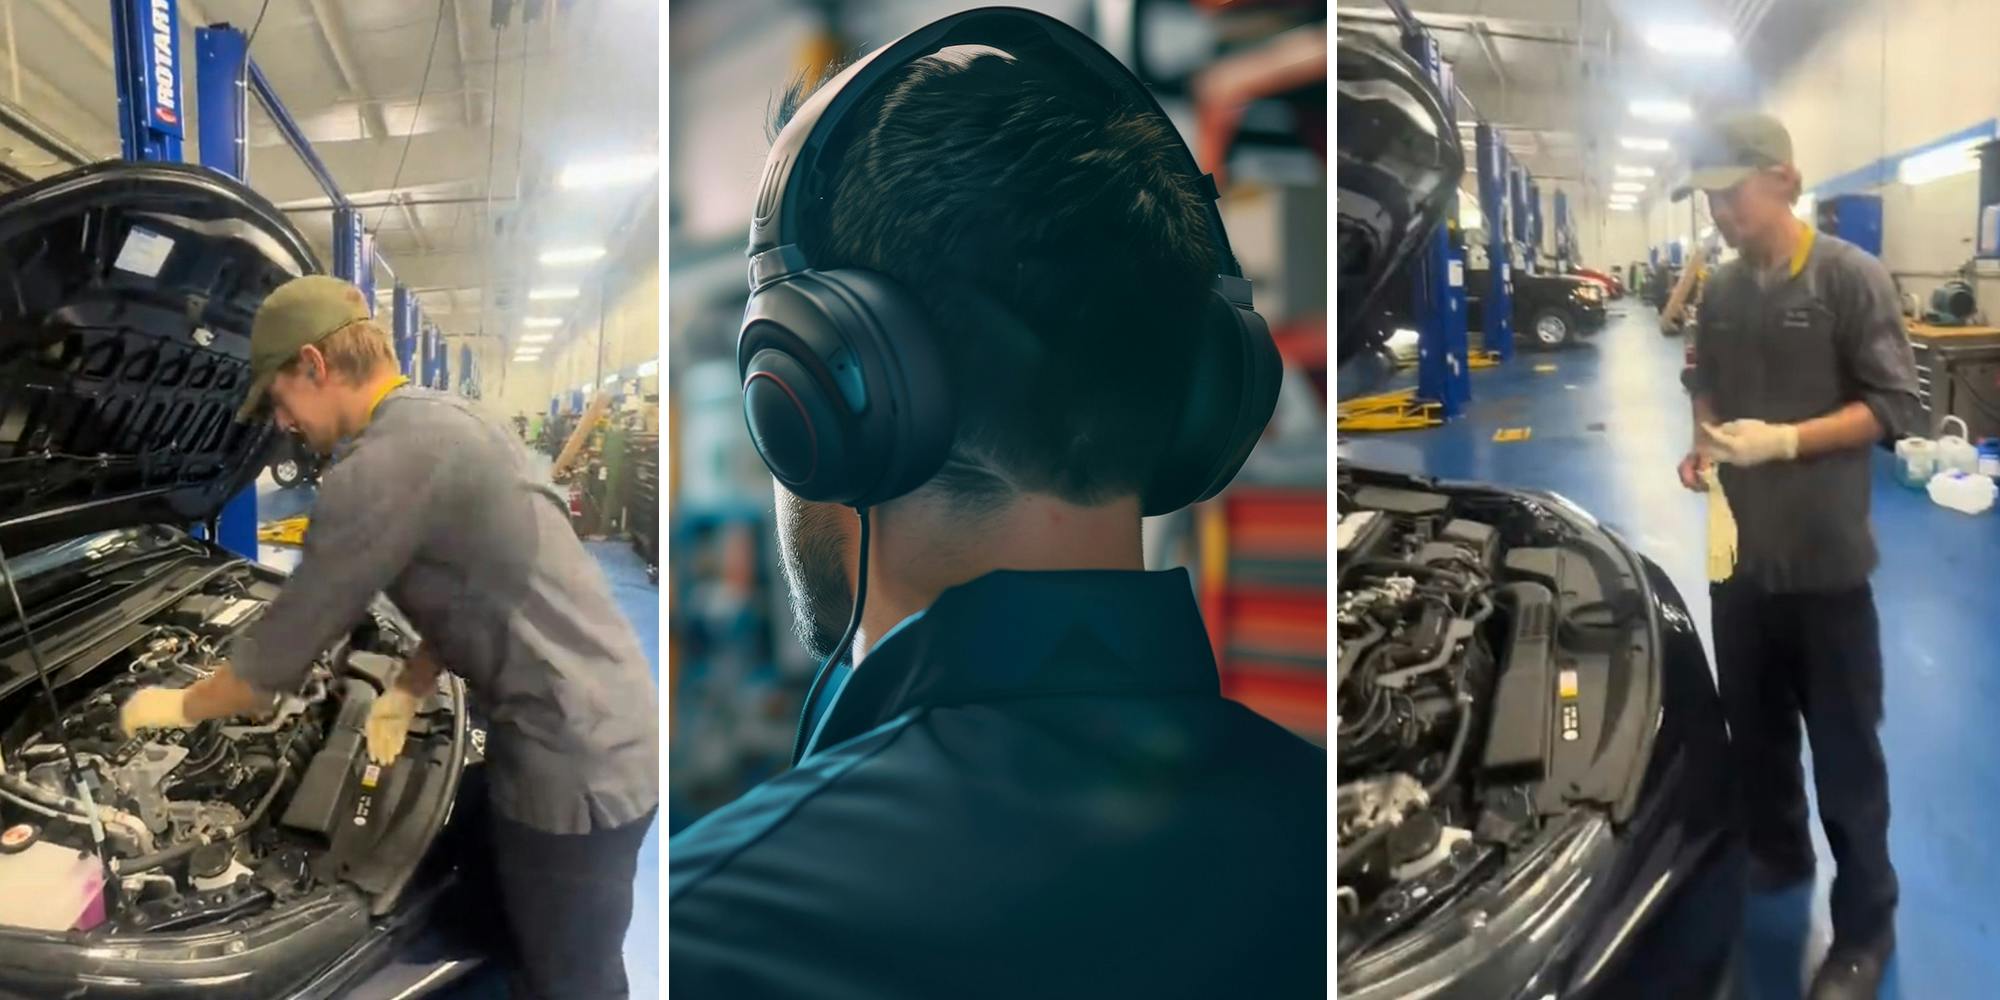 ‘It’s a Toyota tho’: Mechanic reveals the real reason they wear headphones in the shop